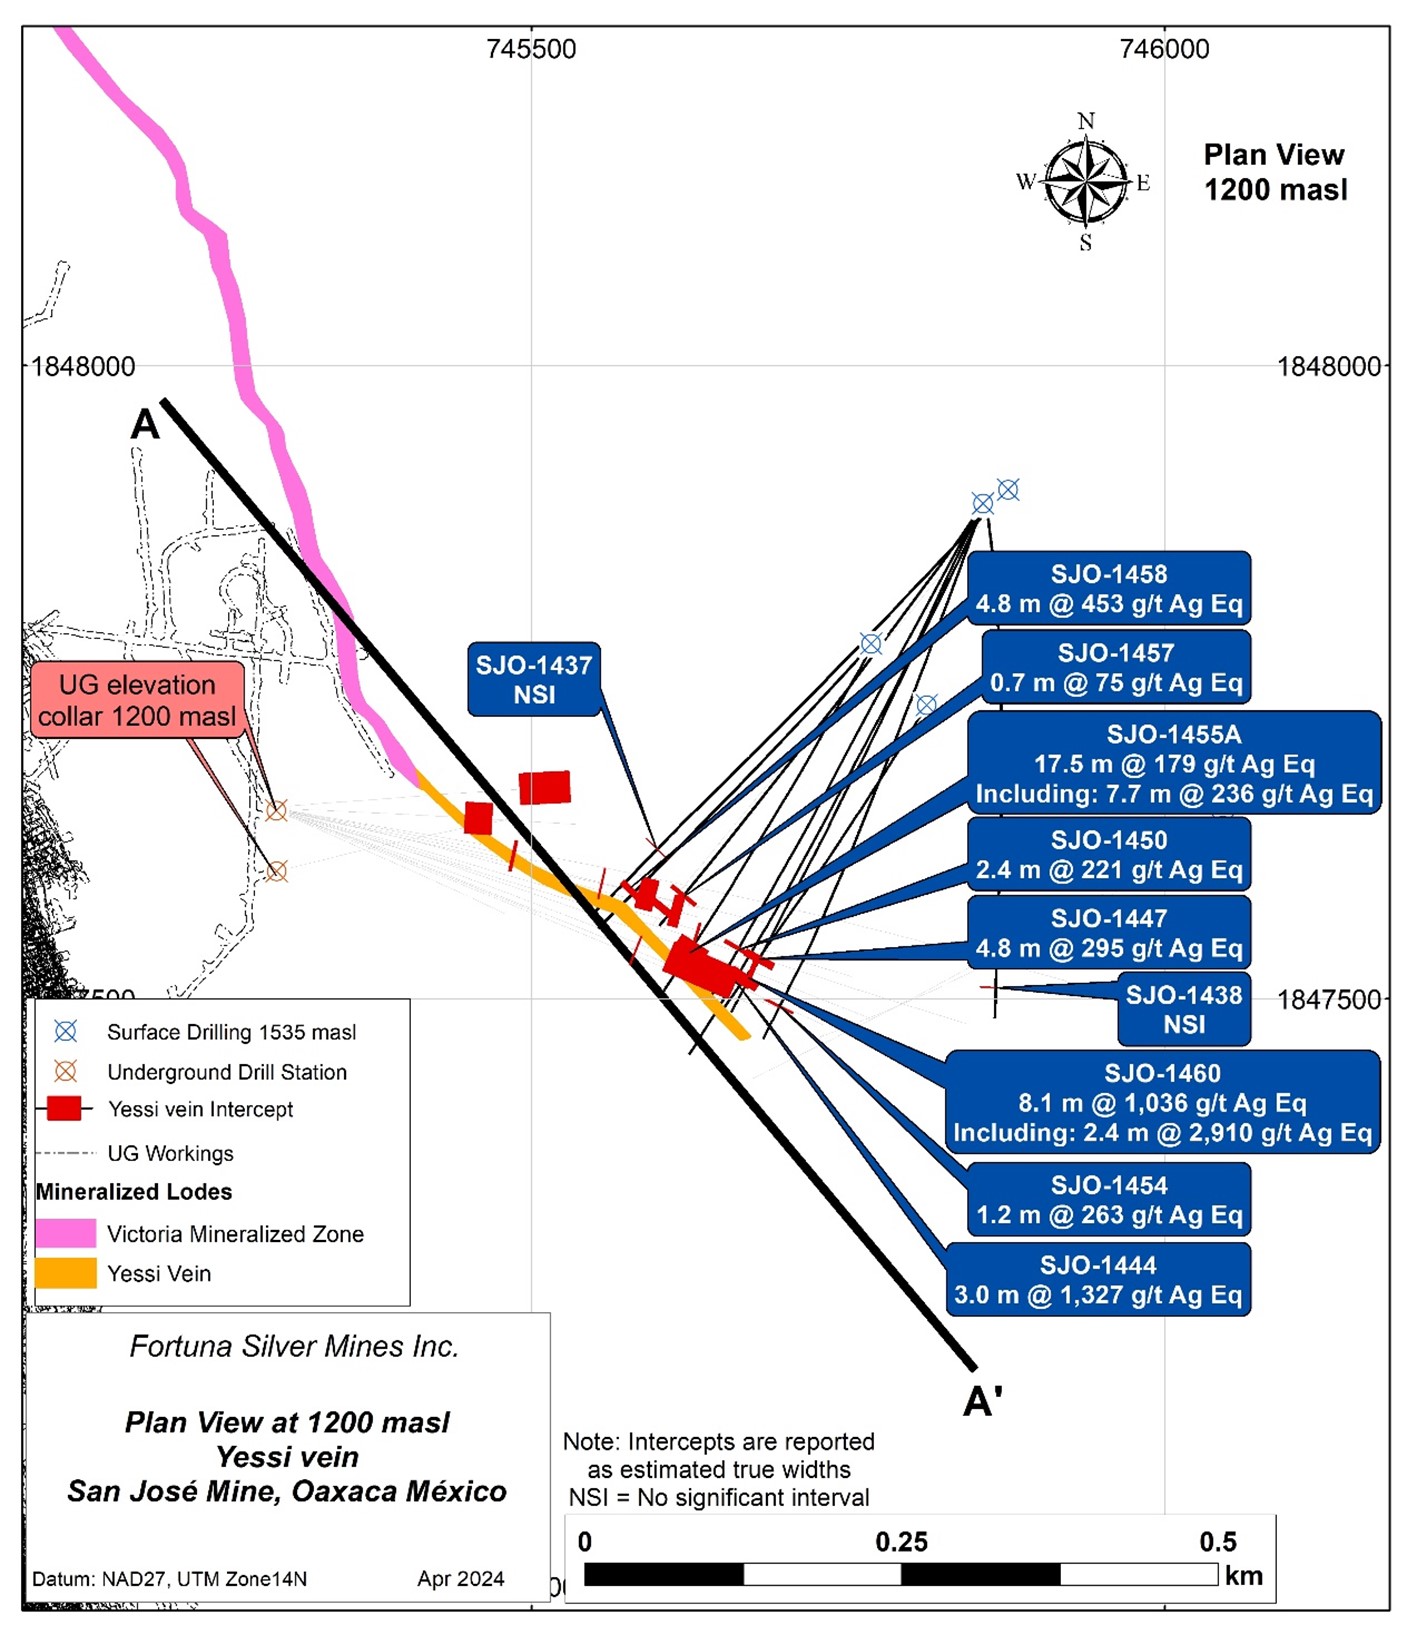 Fortuna intersects 1kg Ag Eq over an estimated true width of 8.1m at the Yessi vein, San Jose Mine, Mexico